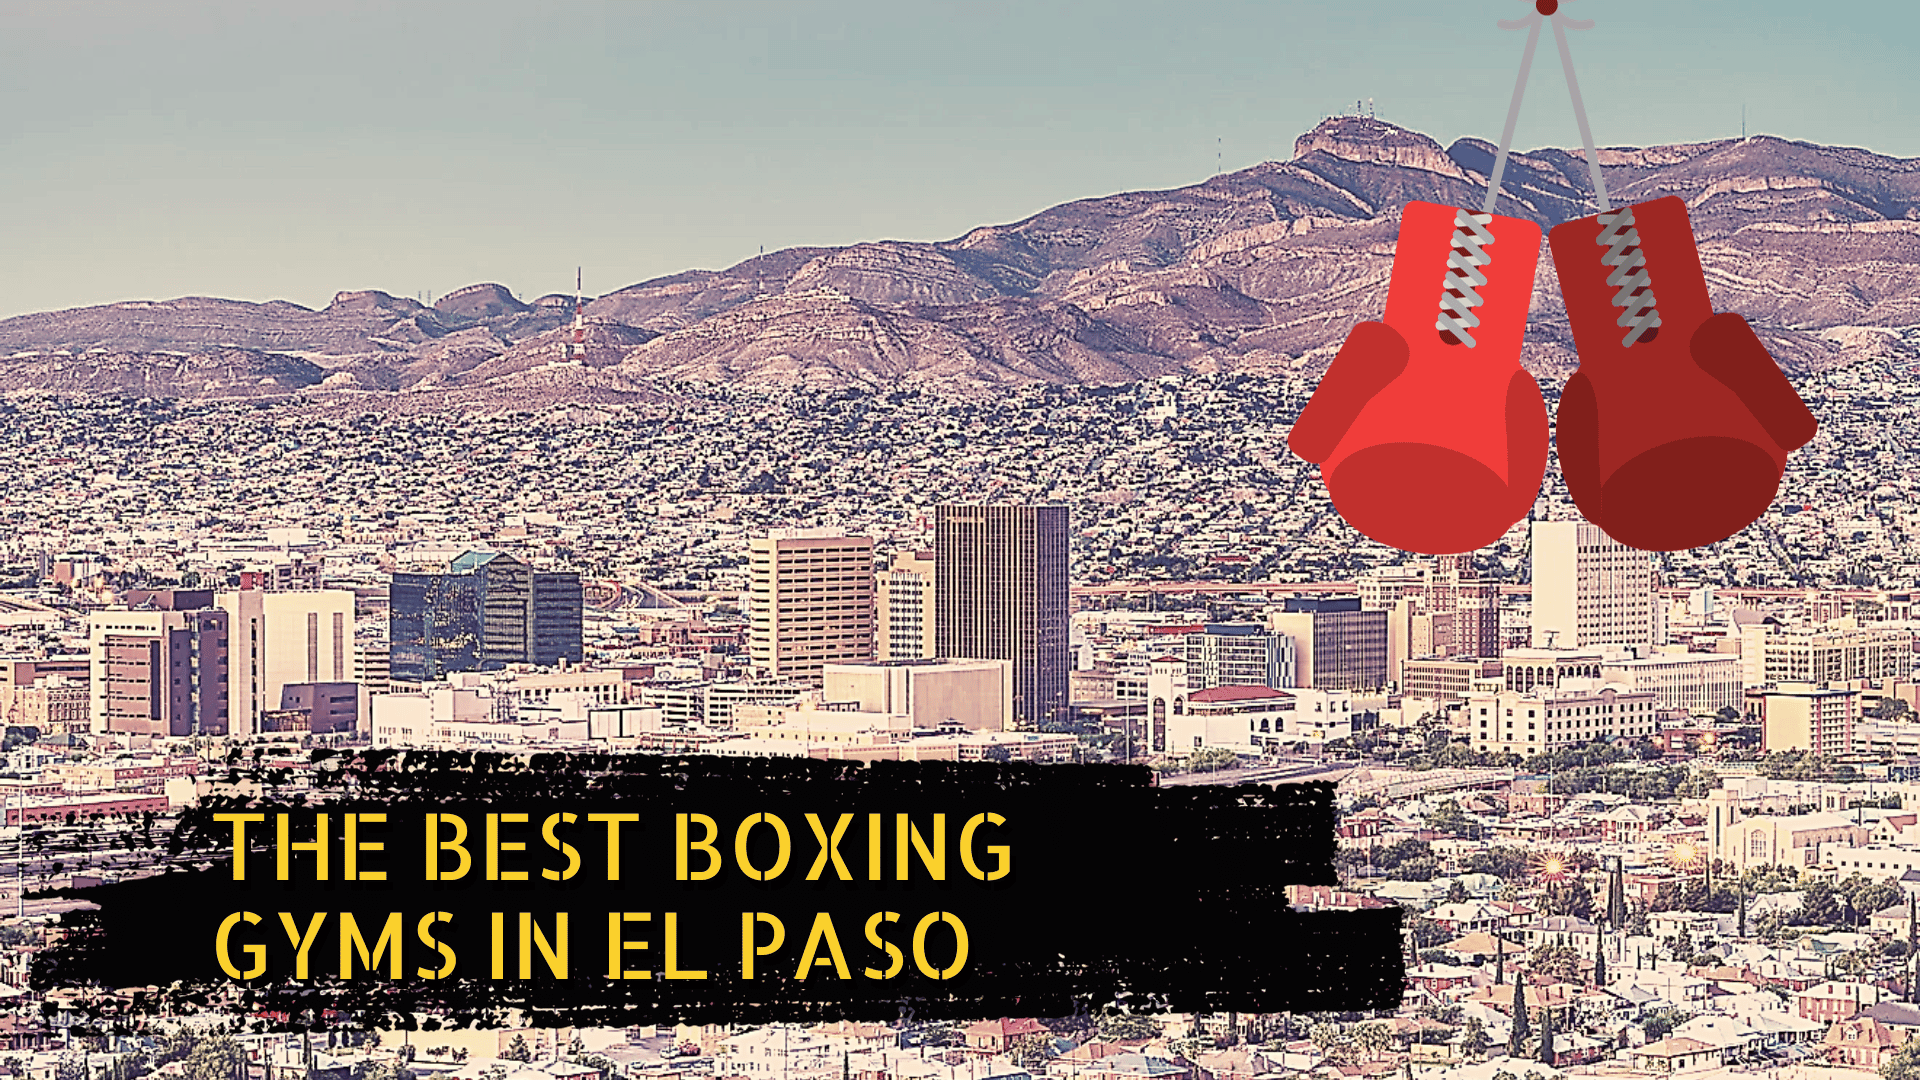 El Paso skyline, some boxing gloves, and the title the best boxing gyms in El Paso